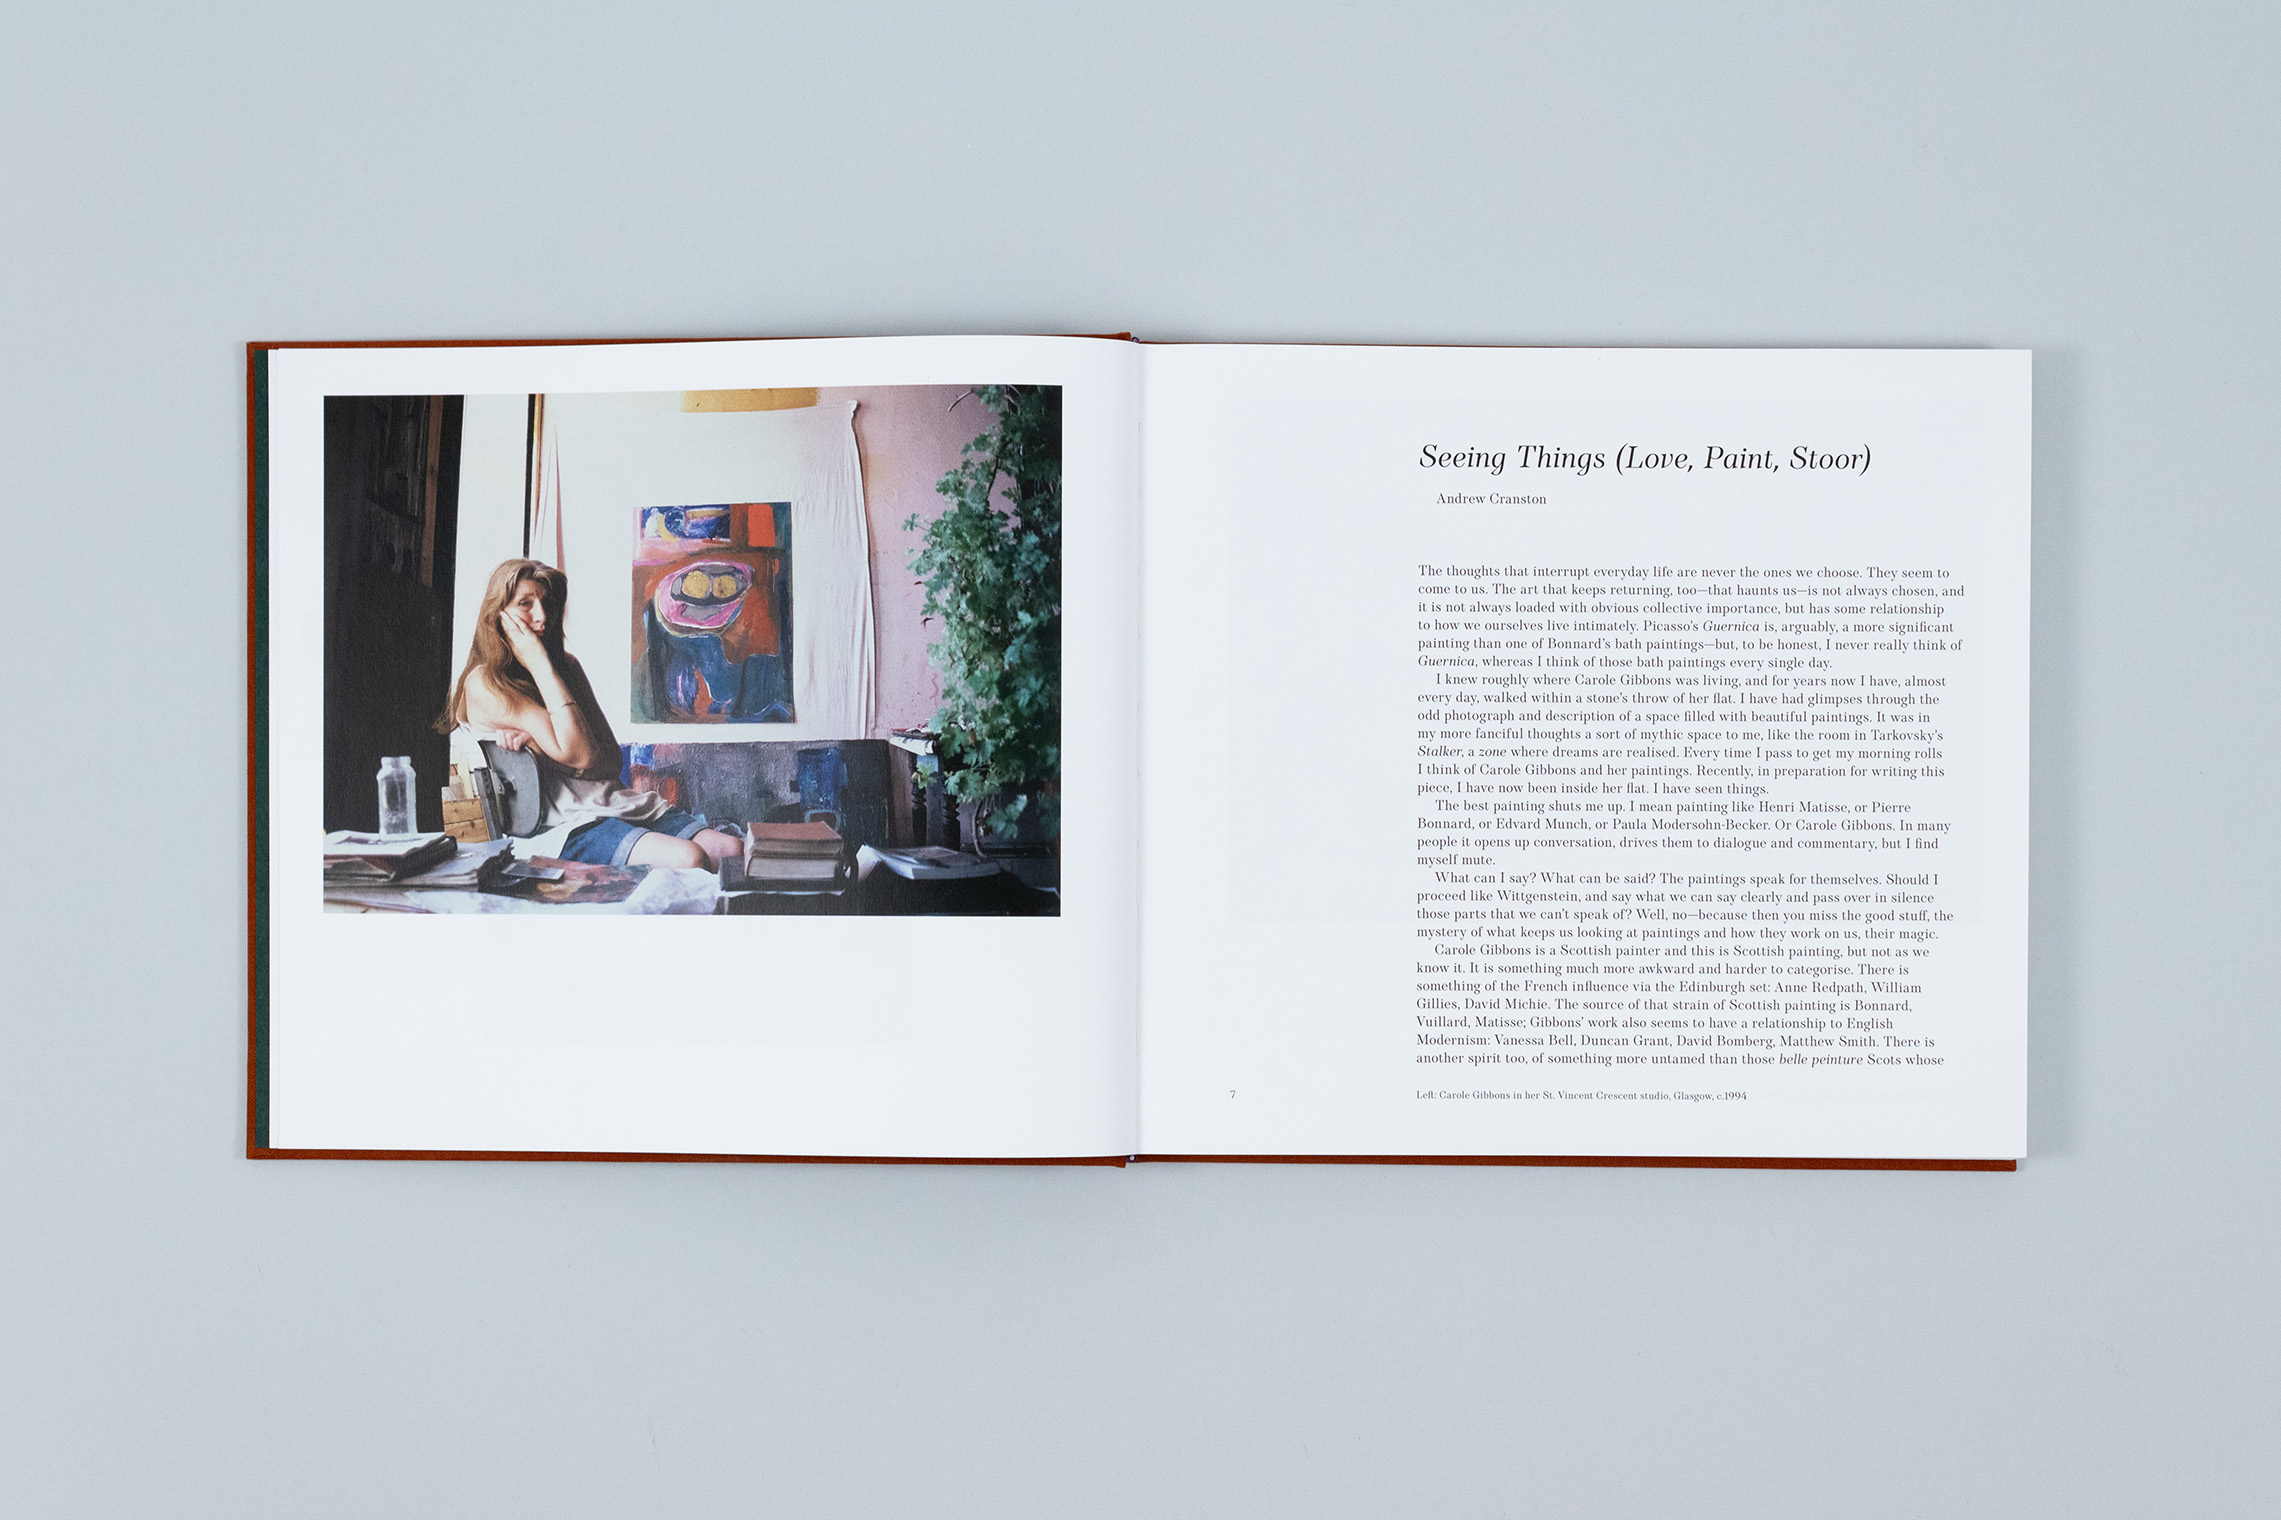 Carole Gibbons monograph spread with Andrew Cranston essay and vintage photograph of Carole Gibbons in her home studio